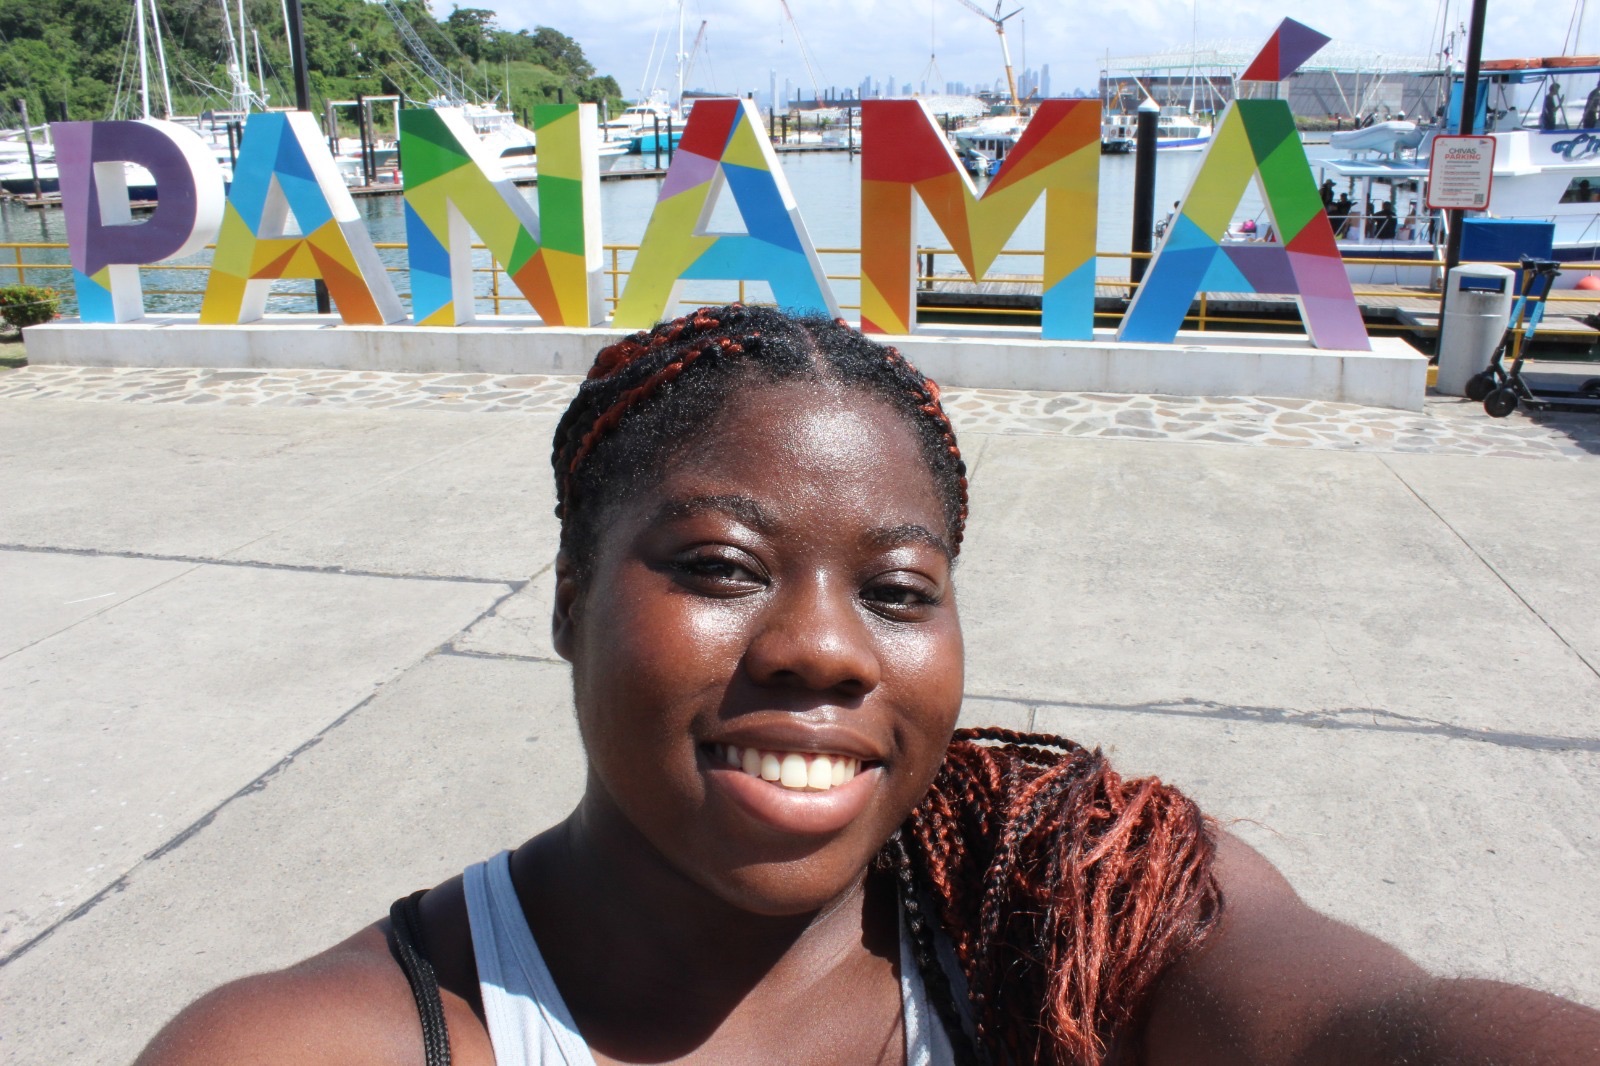 Ianna stands smiling in front of multicolored letter sculptures that spell Panama.